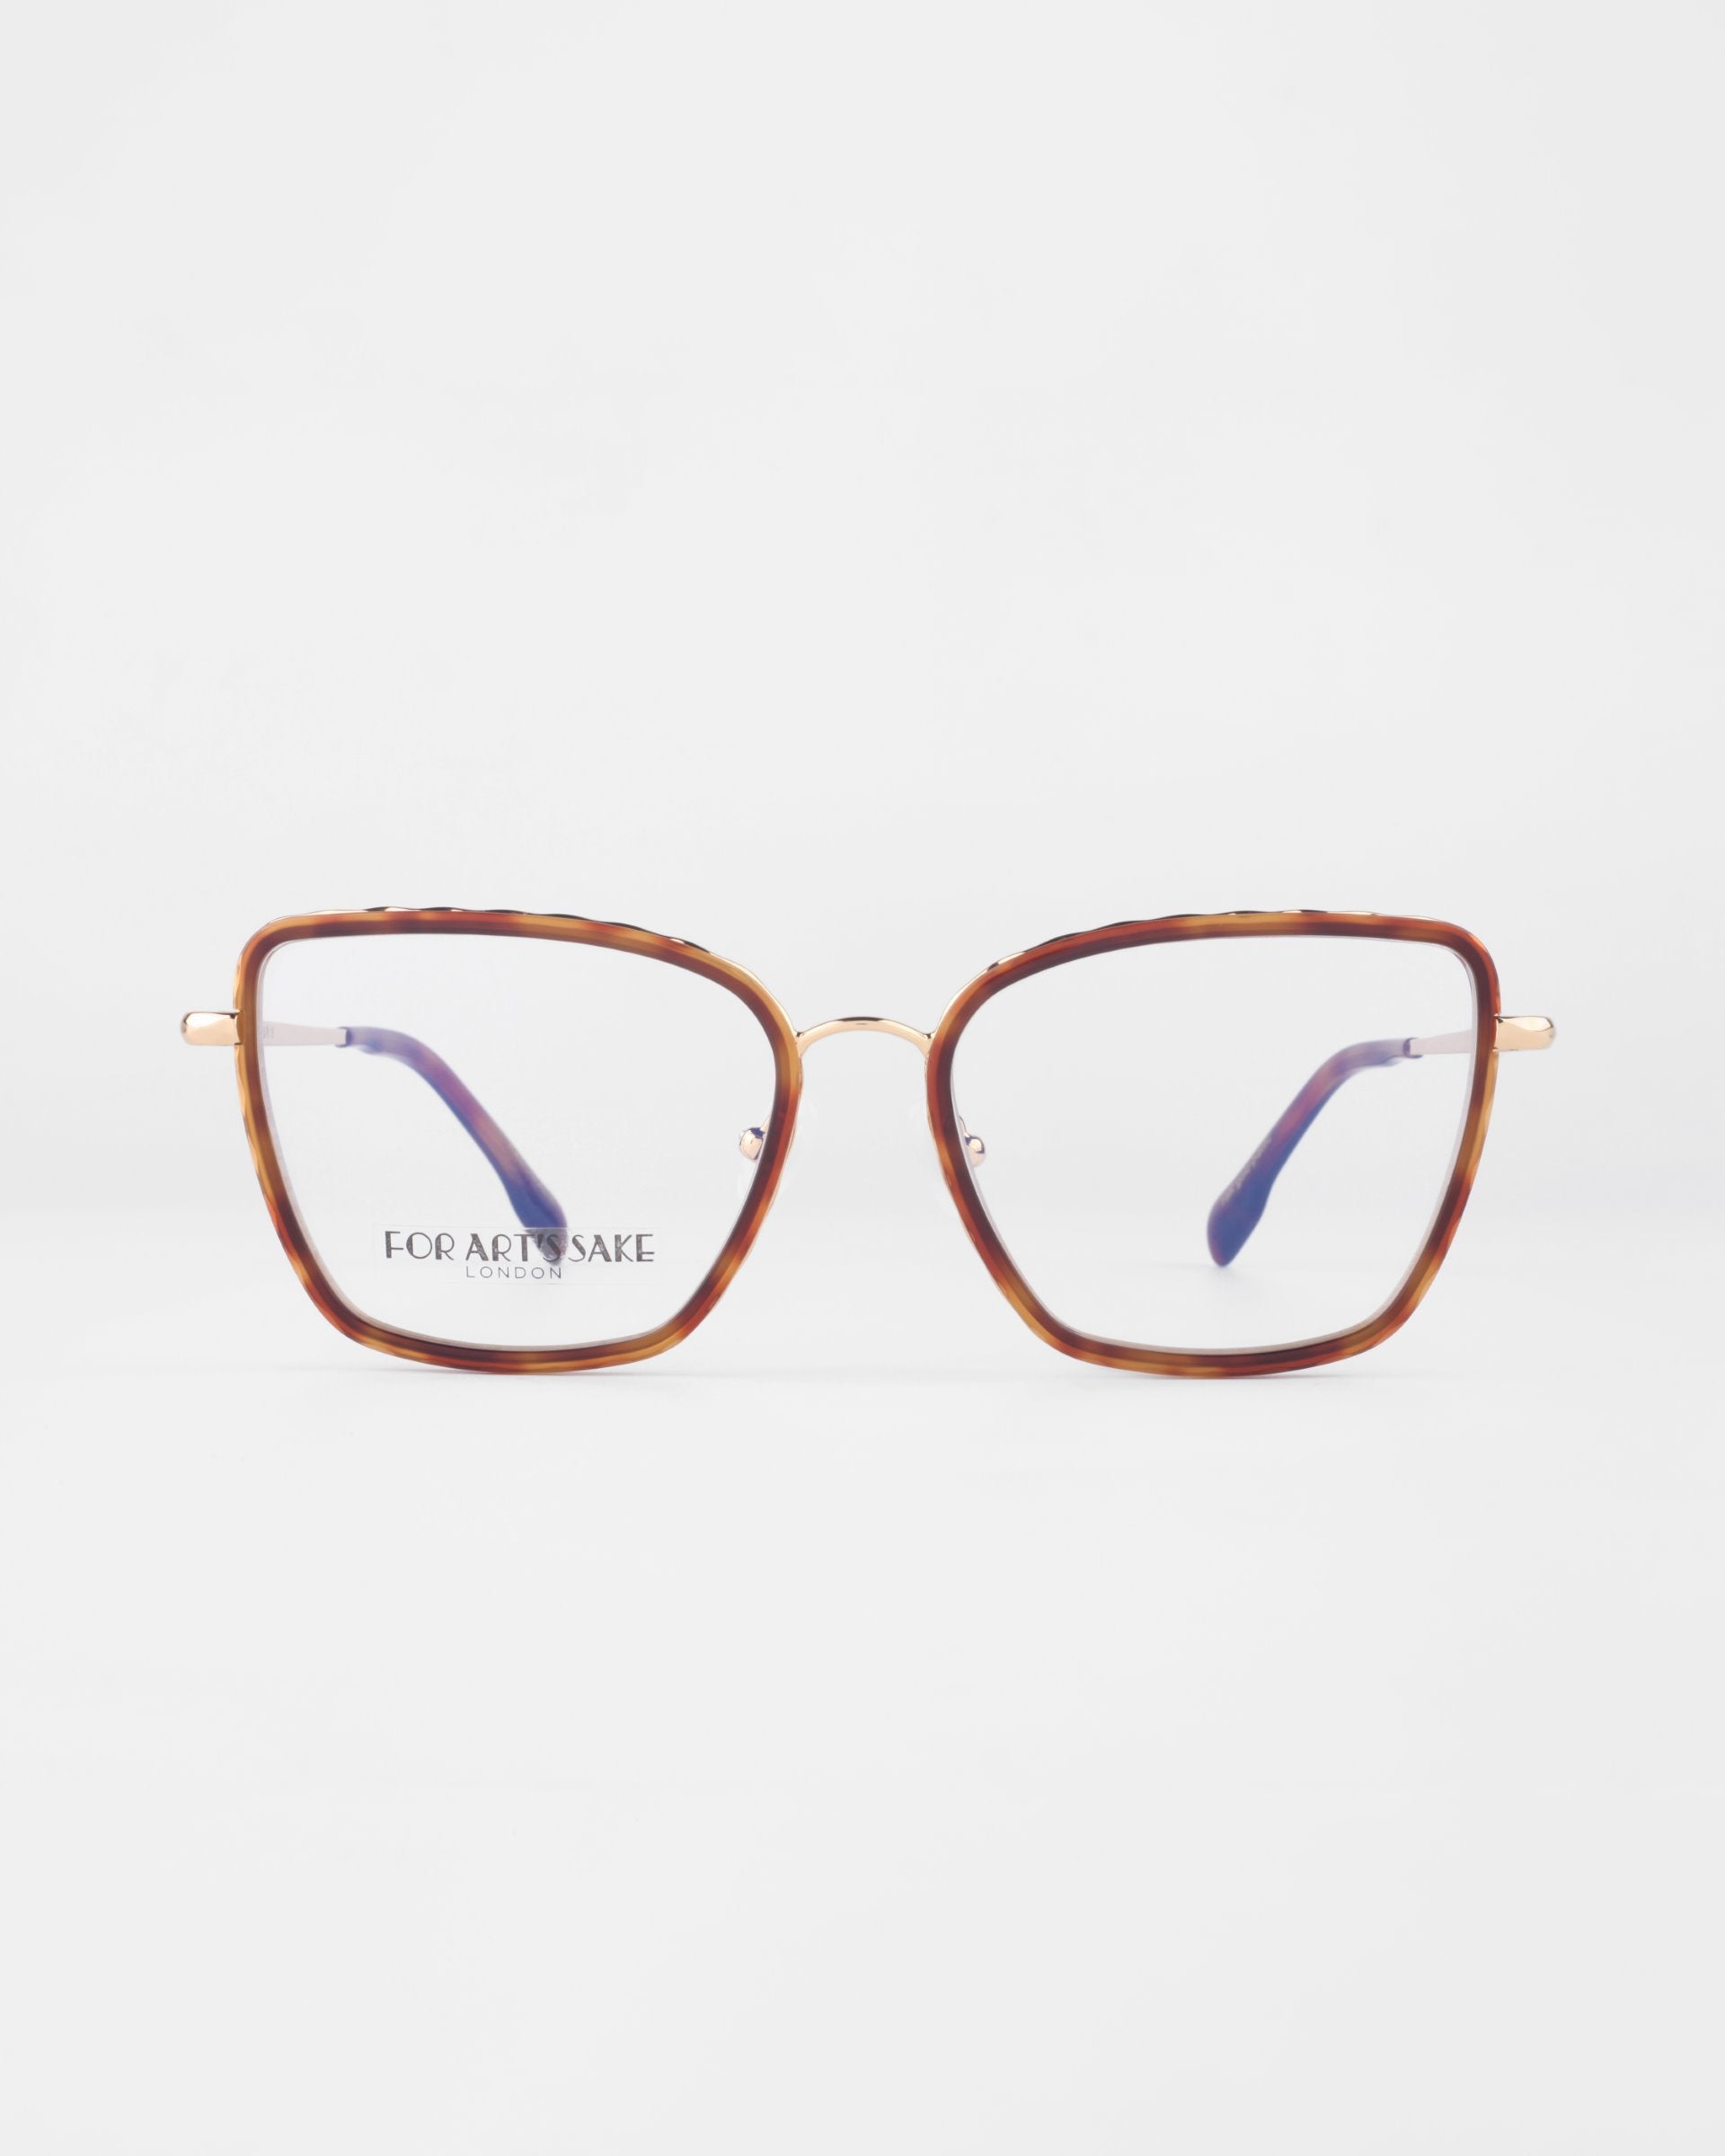 A pair of brown, large, square-rimmed glasses with gold-colored arms and purple inner tips. The transparent lenses showcase the brand text "For Art's Sake®" on the left lens. Featuring 18-karat gold-plated frames, the Lace glasses are positioned against a plain white background.